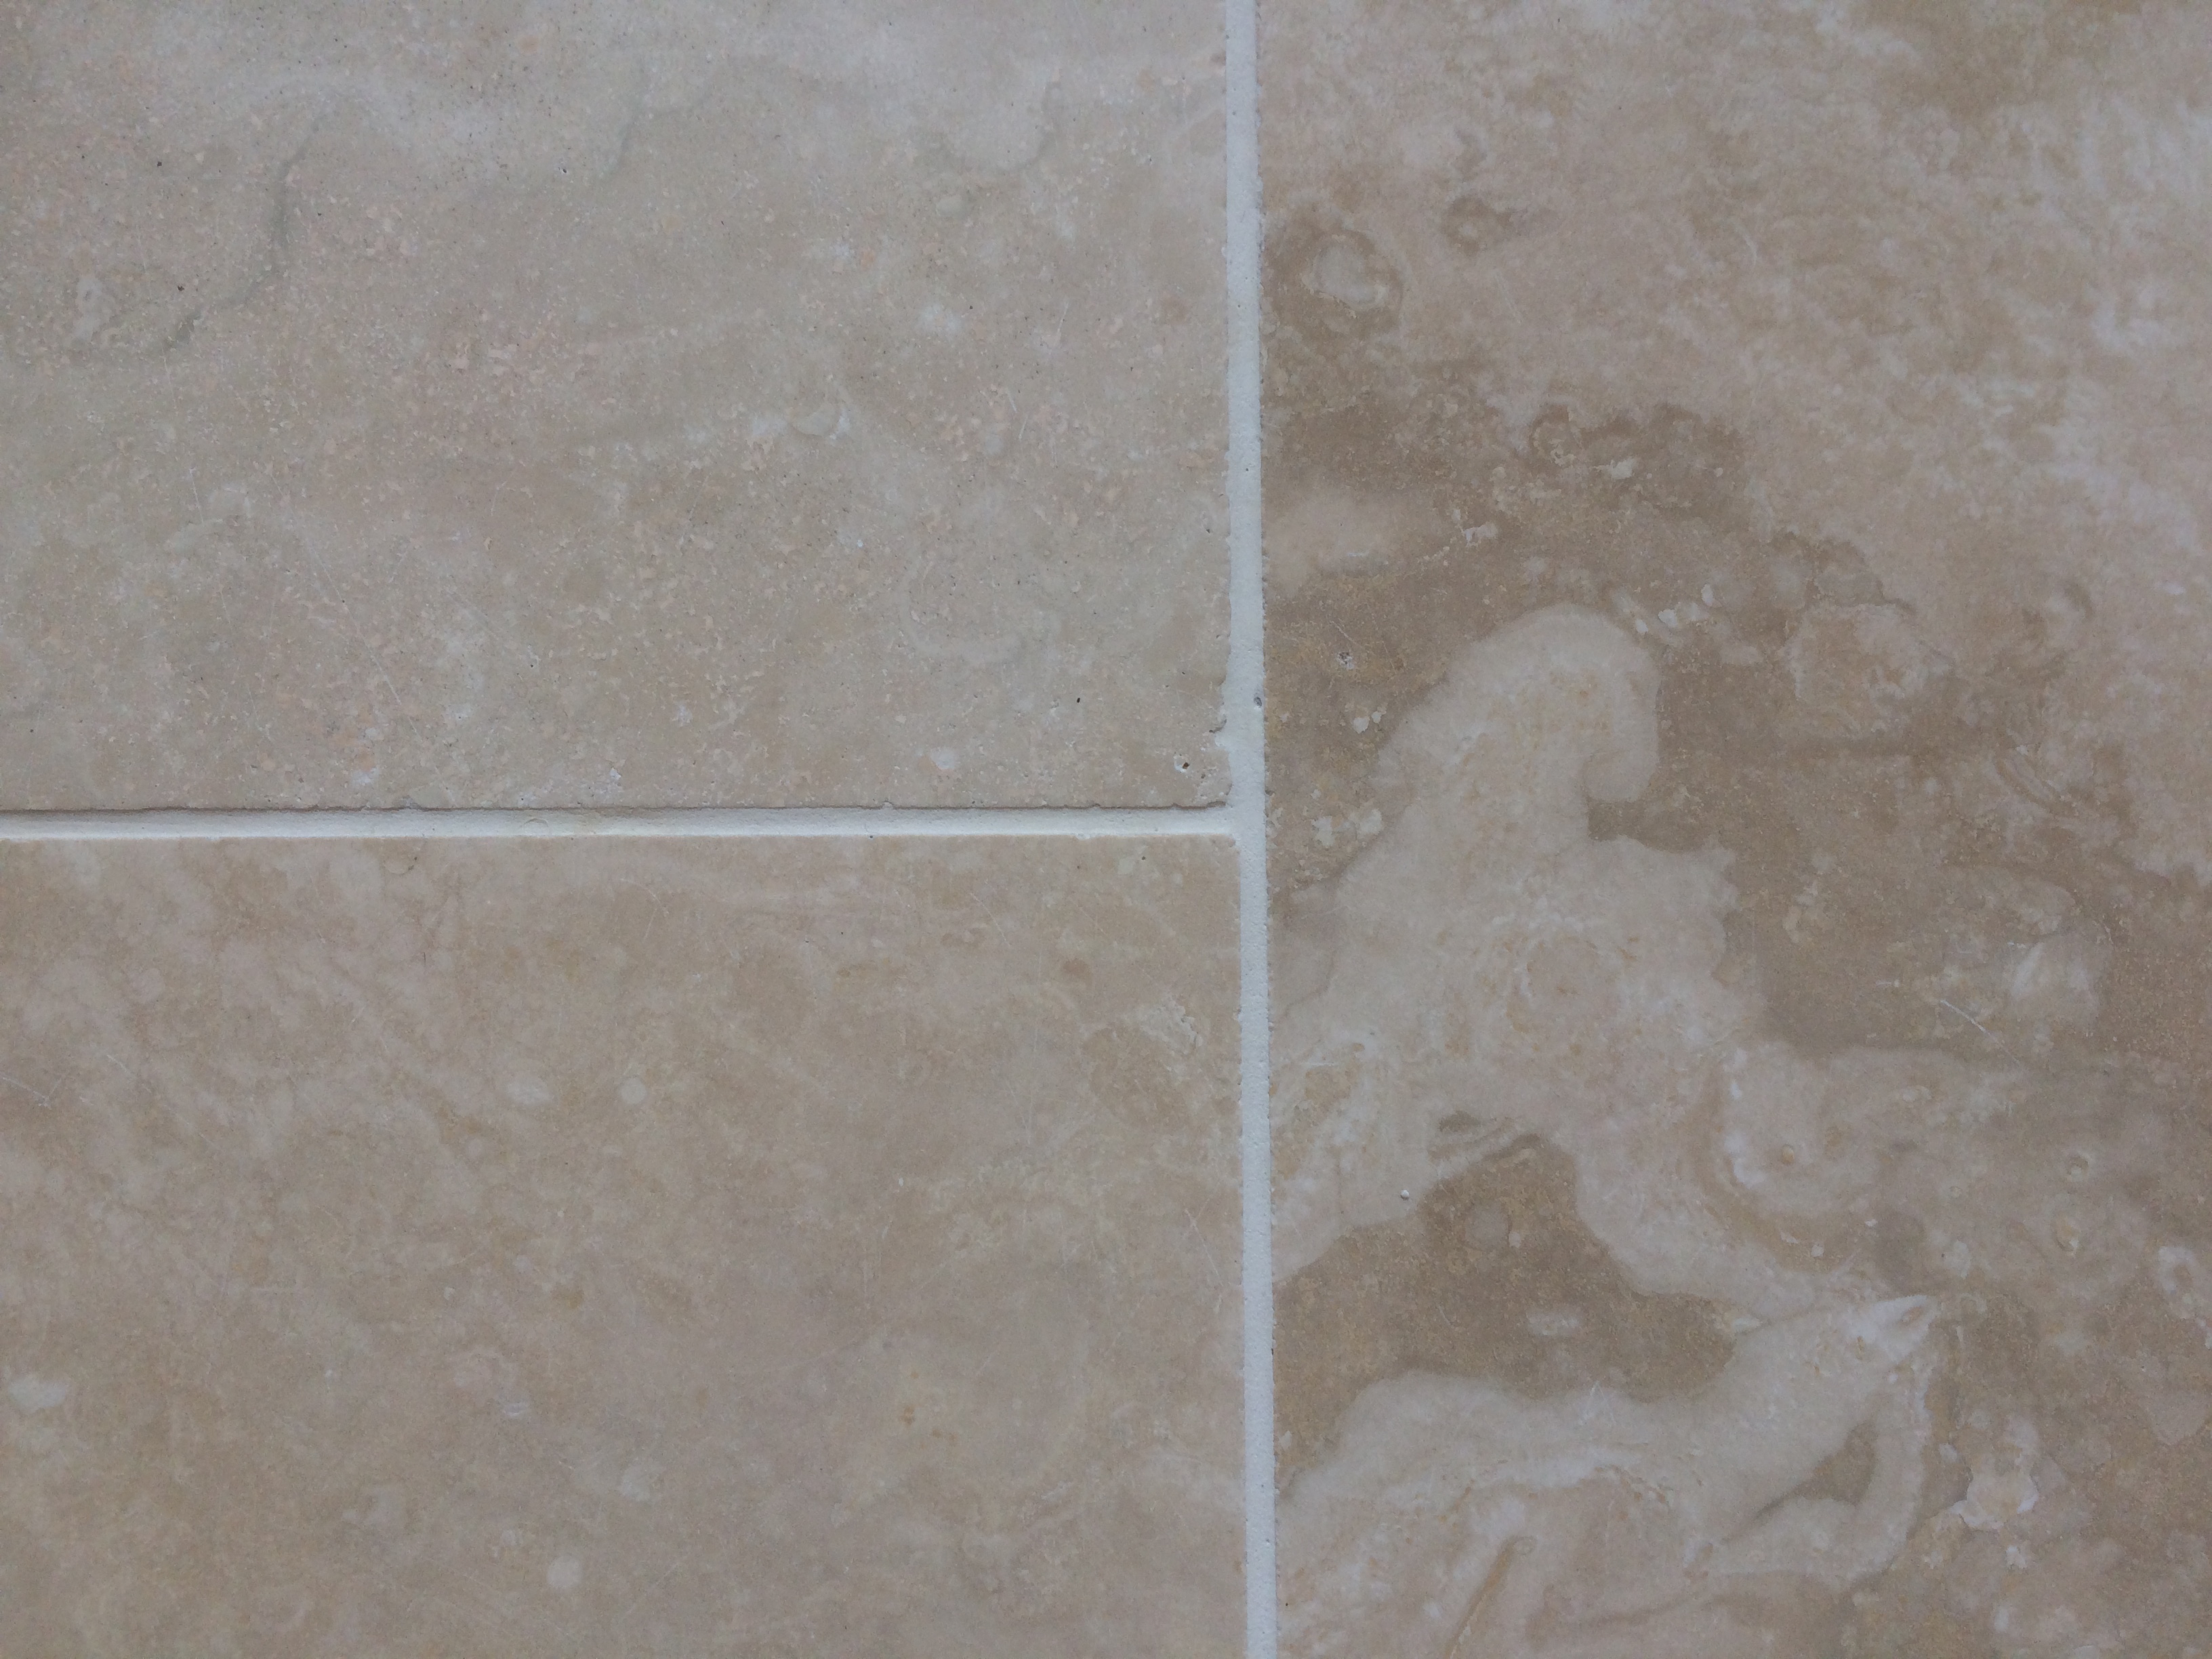 Clean Grout Lines On A Travertine Tiled Floor